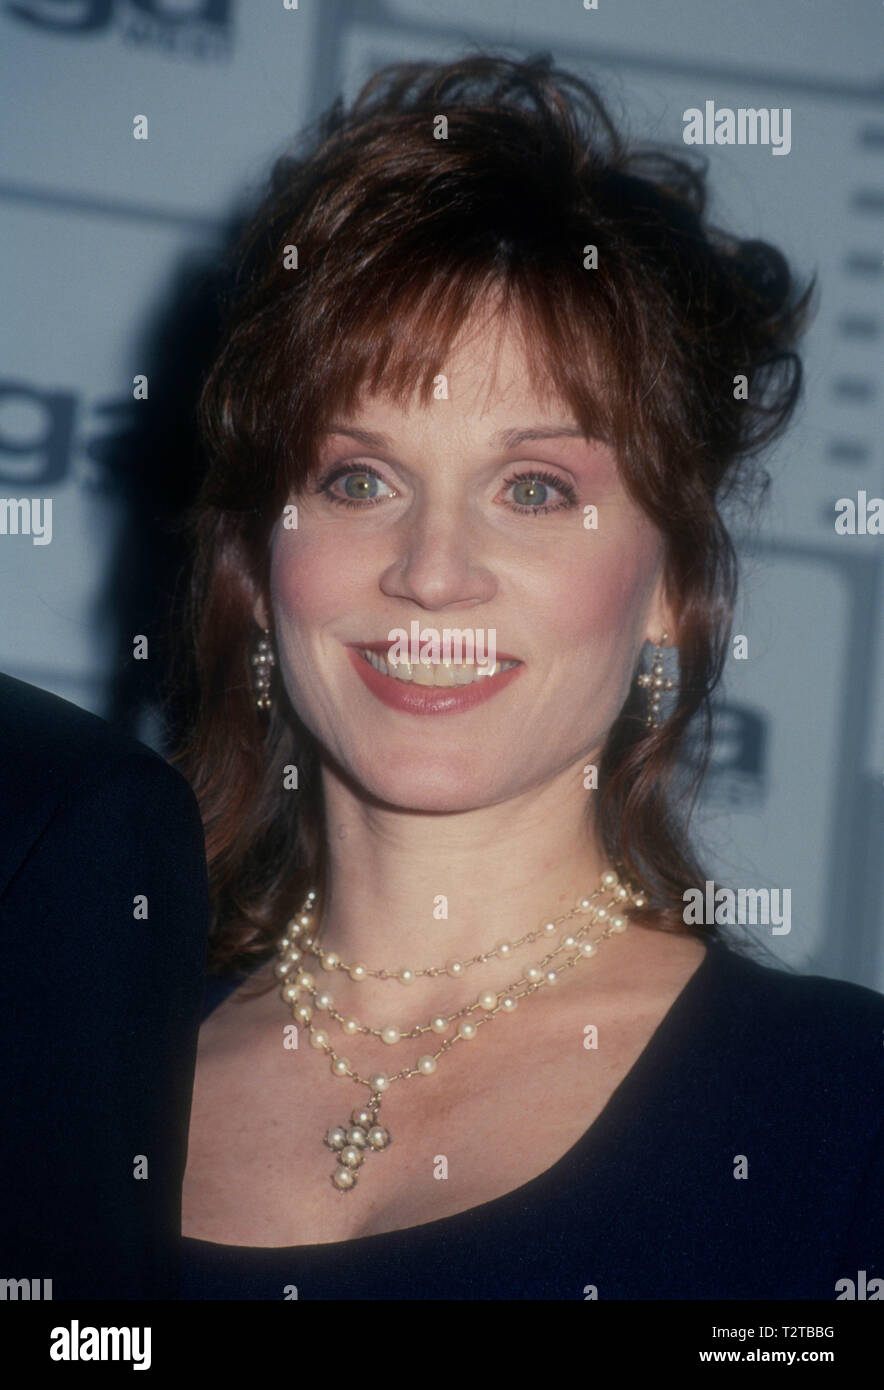 BEVERLY HILLS, CA - MARCH 13: Actress Marilu Henner attends the 46th Annual Writers Guild of America Awards on March 13, 1994 at the Beverly Hilton Hotel in Beverly Hills, California. Photo by Barry King/Alamy Stock Photo Stock Photo